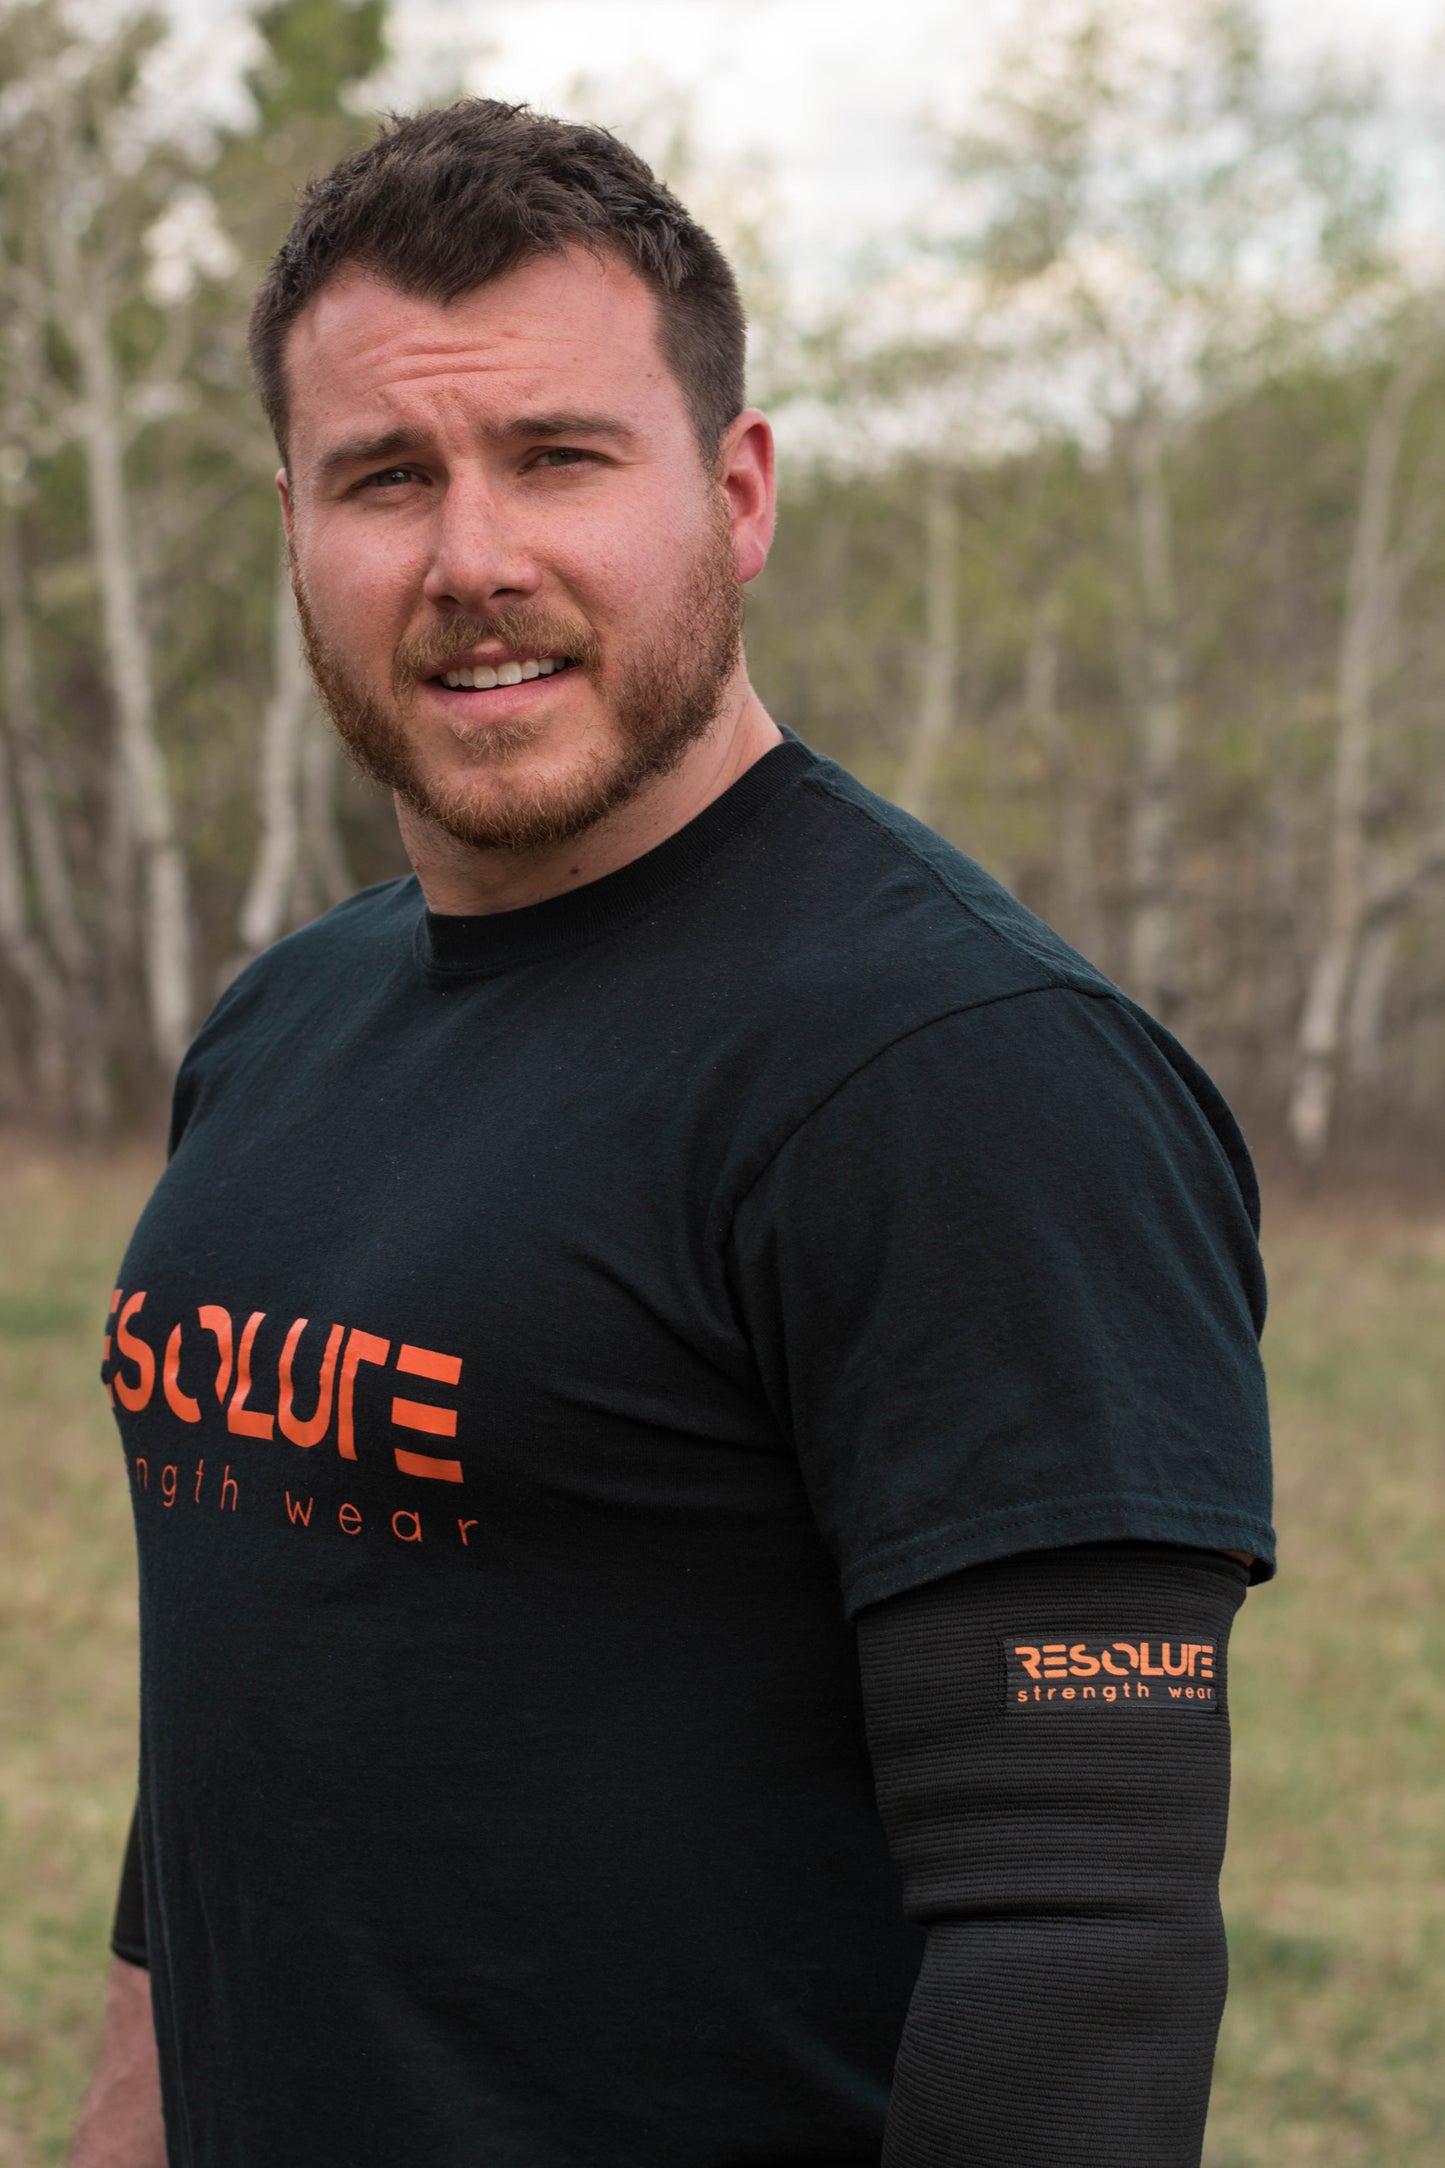 Elbow Sleeves - DOUBLE PLY - Resolute Strength Wear